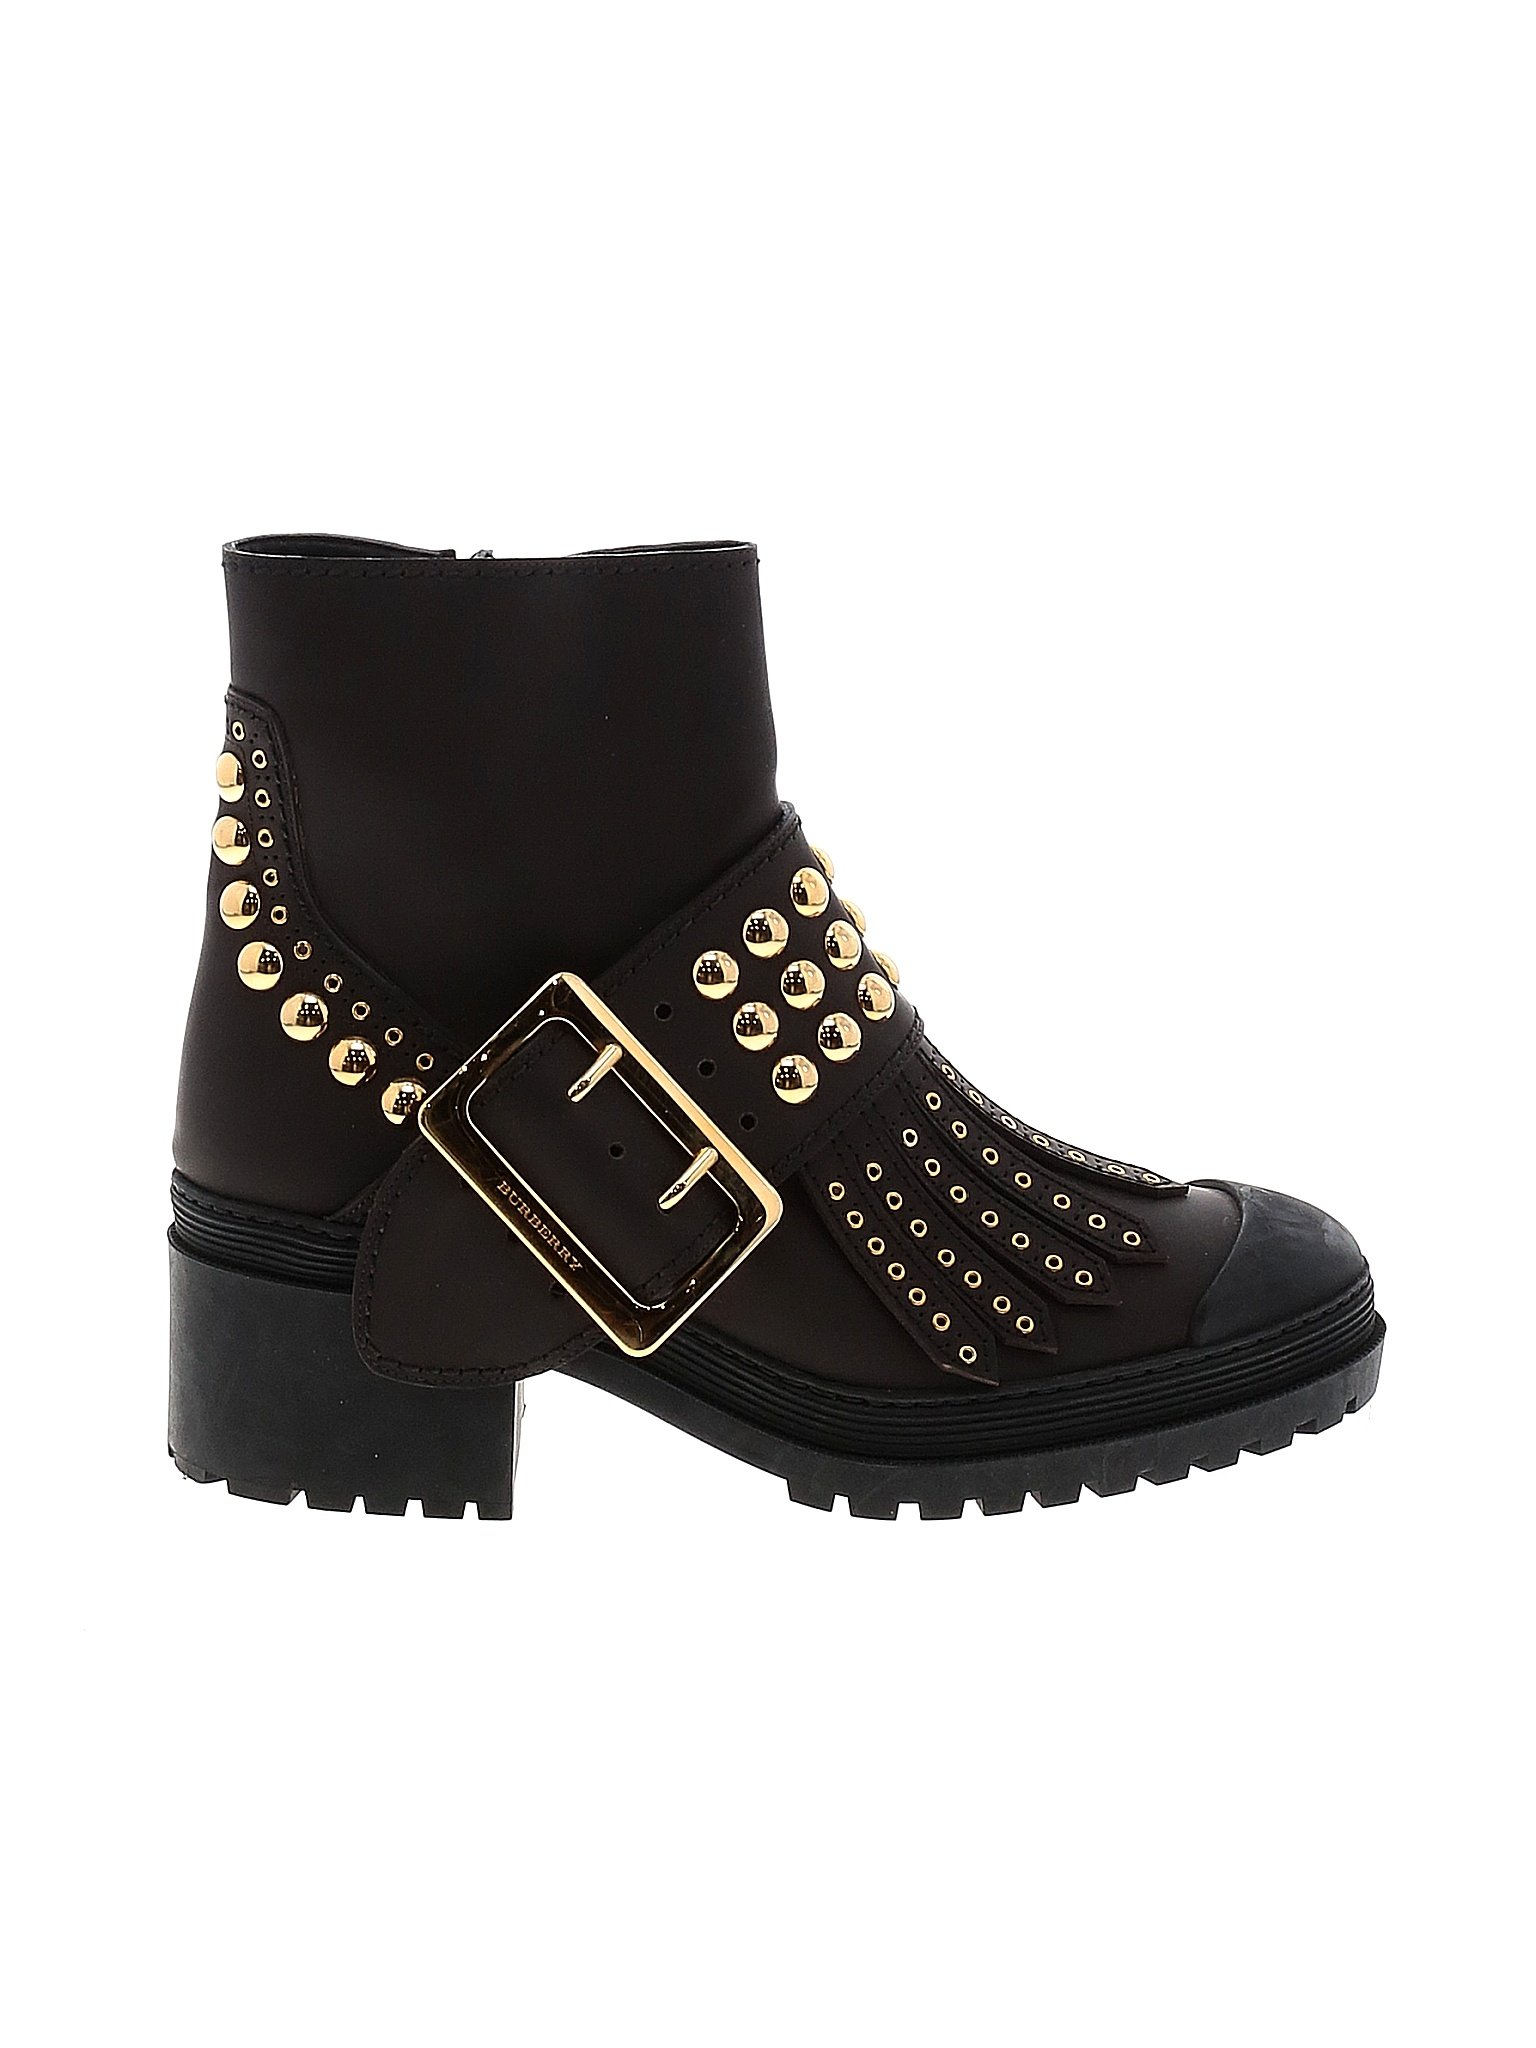 Burberry Women's Boots On Sale Up To 90% Off Retail | thredUP